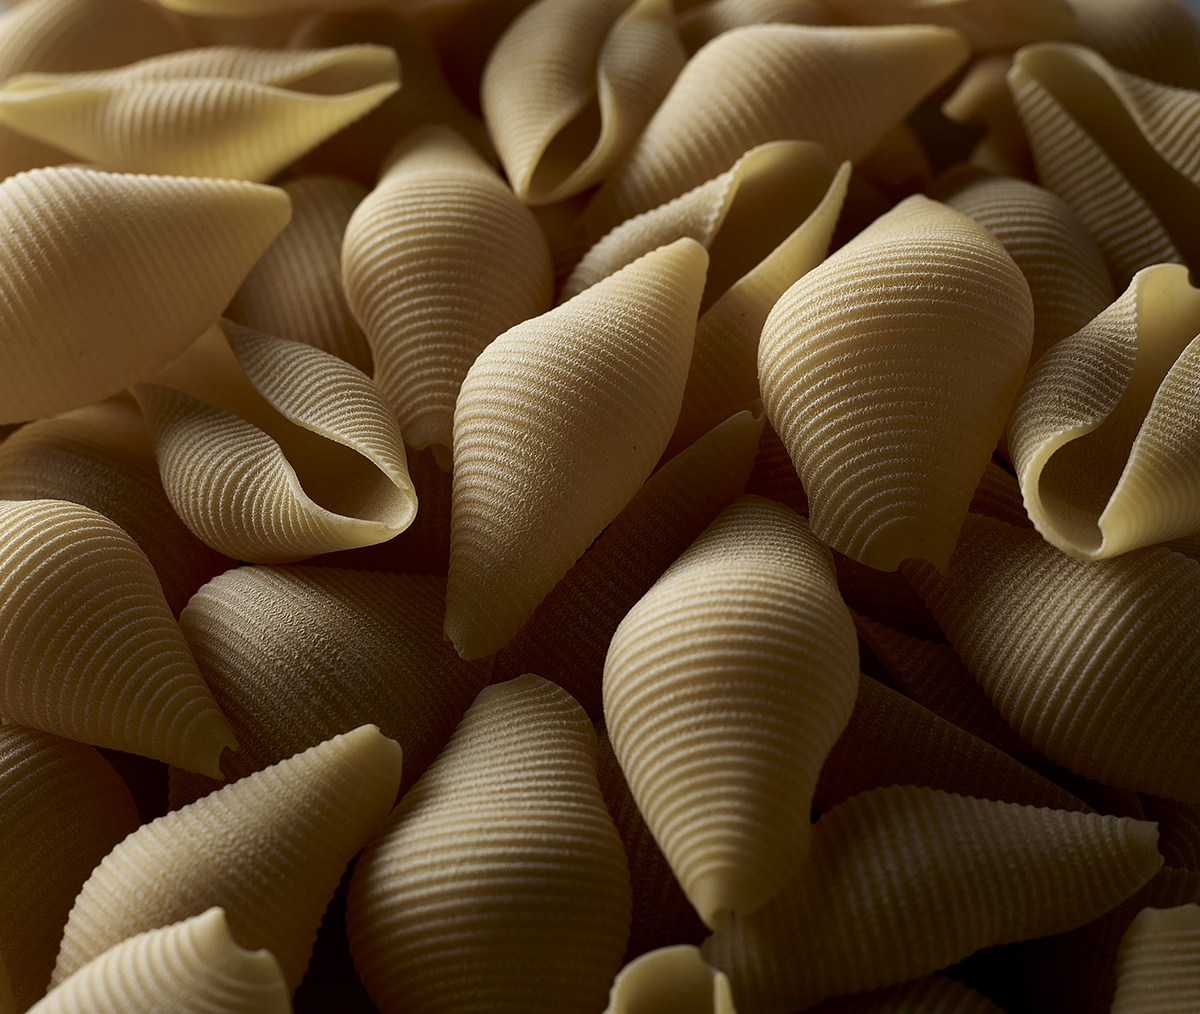 About us, our values in images - Sea of pasta, conchiglioni